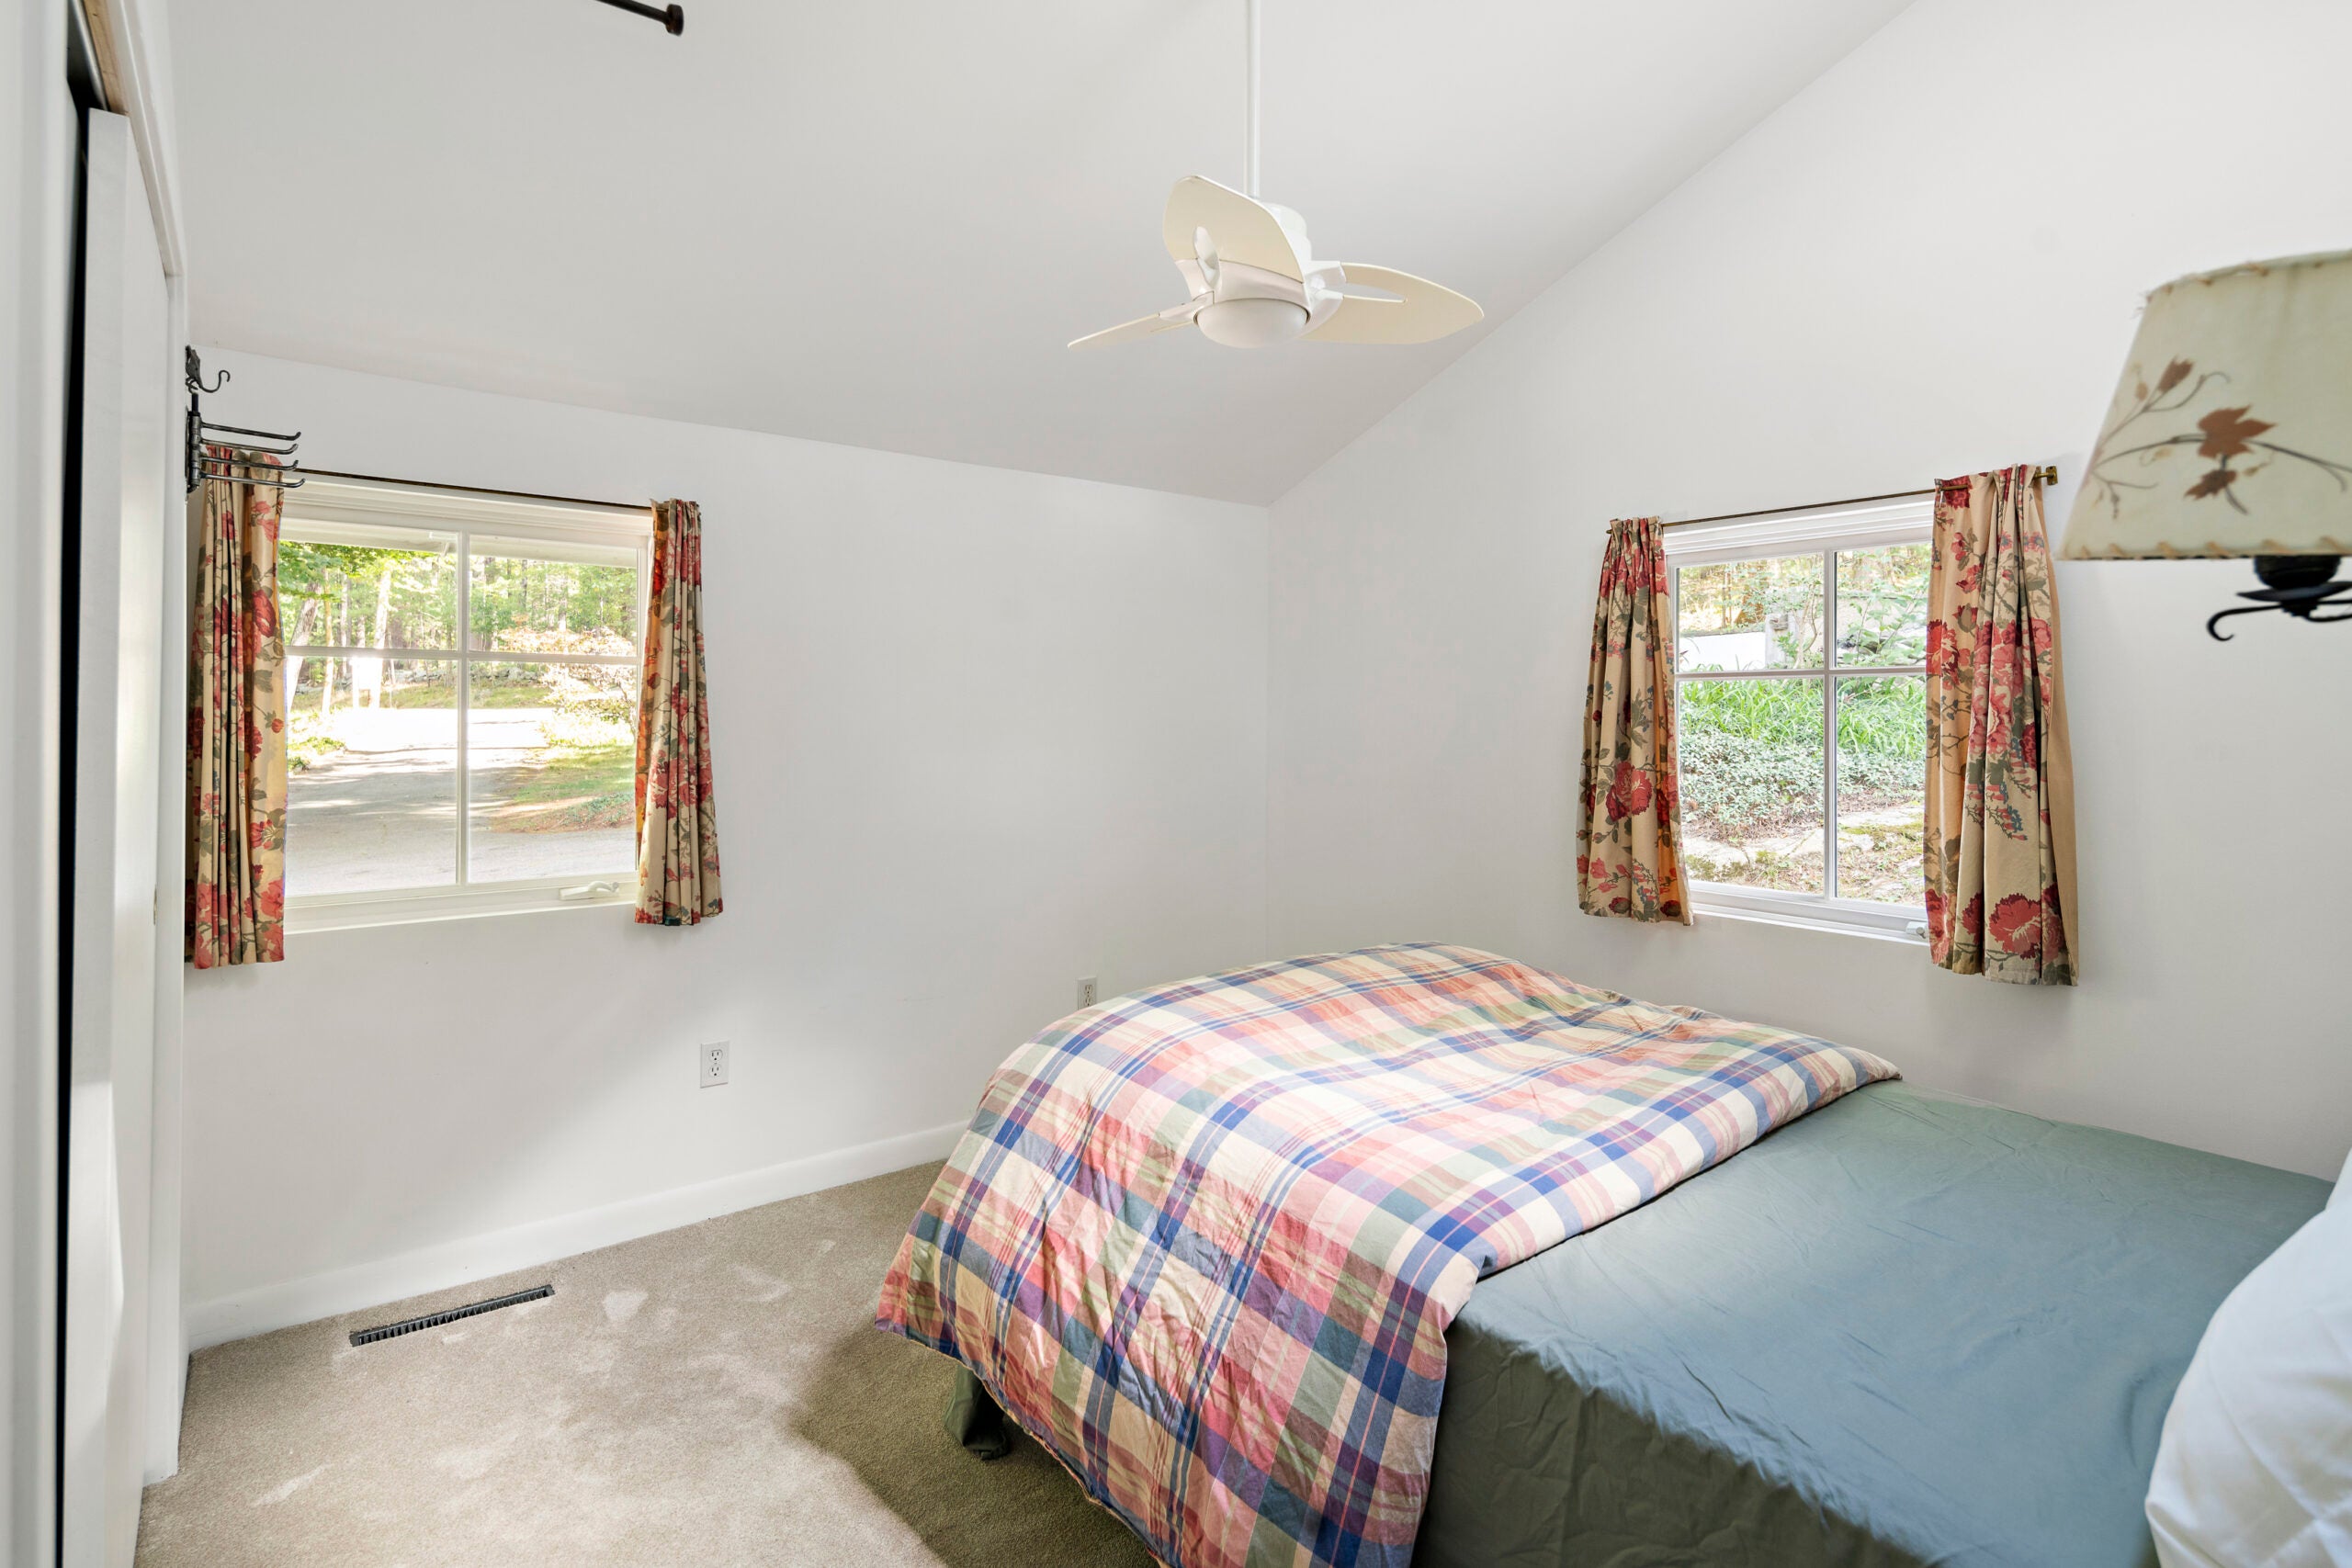 A carpeted bedroom with a small ceiling fan and two-over-two windows.